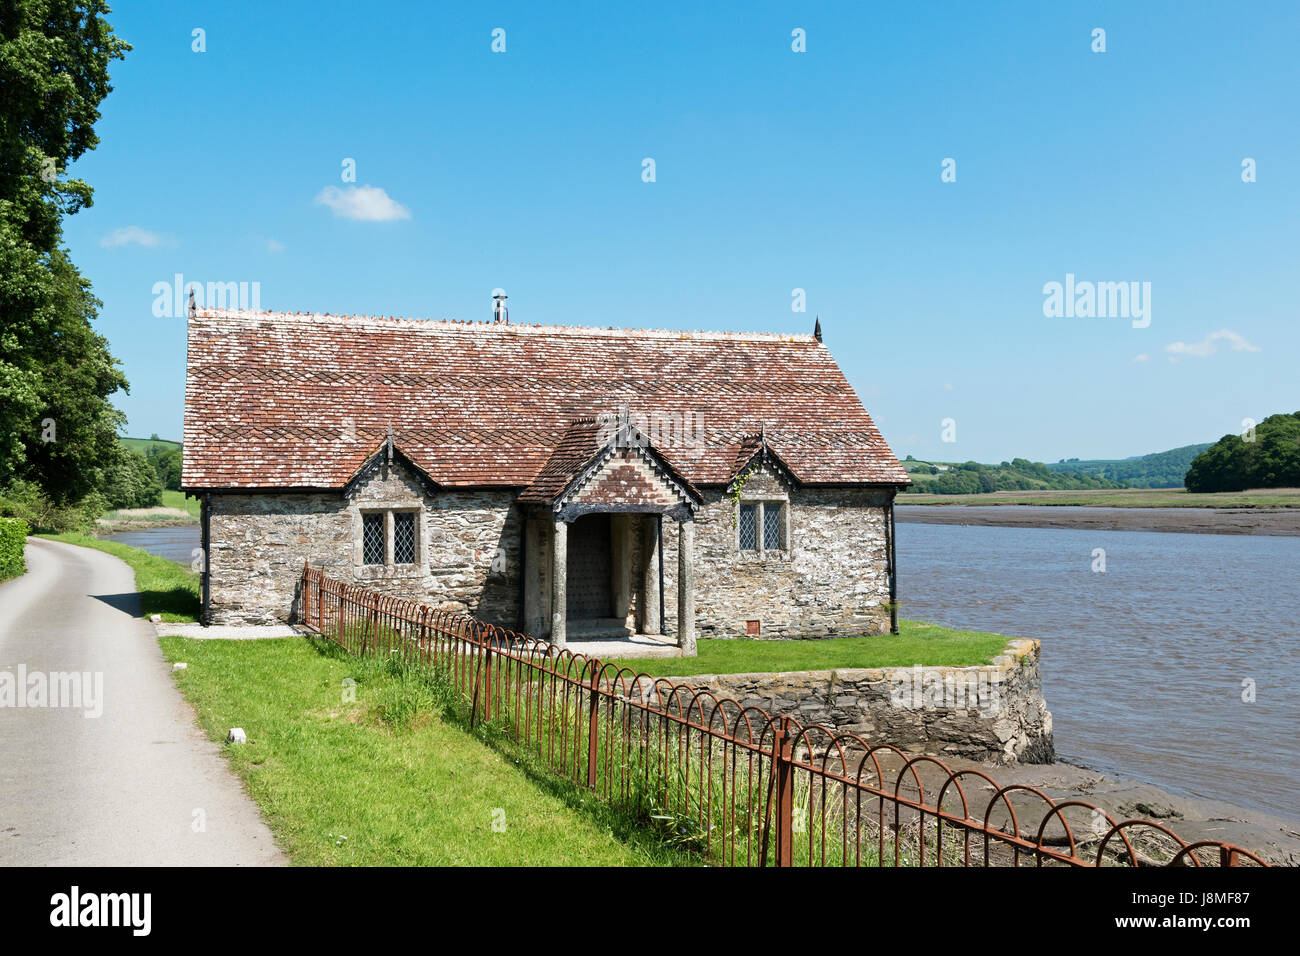 The 17th century bathing hut on the banks of the river tamer at Pentillie castle near St.mellion in Cornwall, England, Britain, UK. Stock Photo